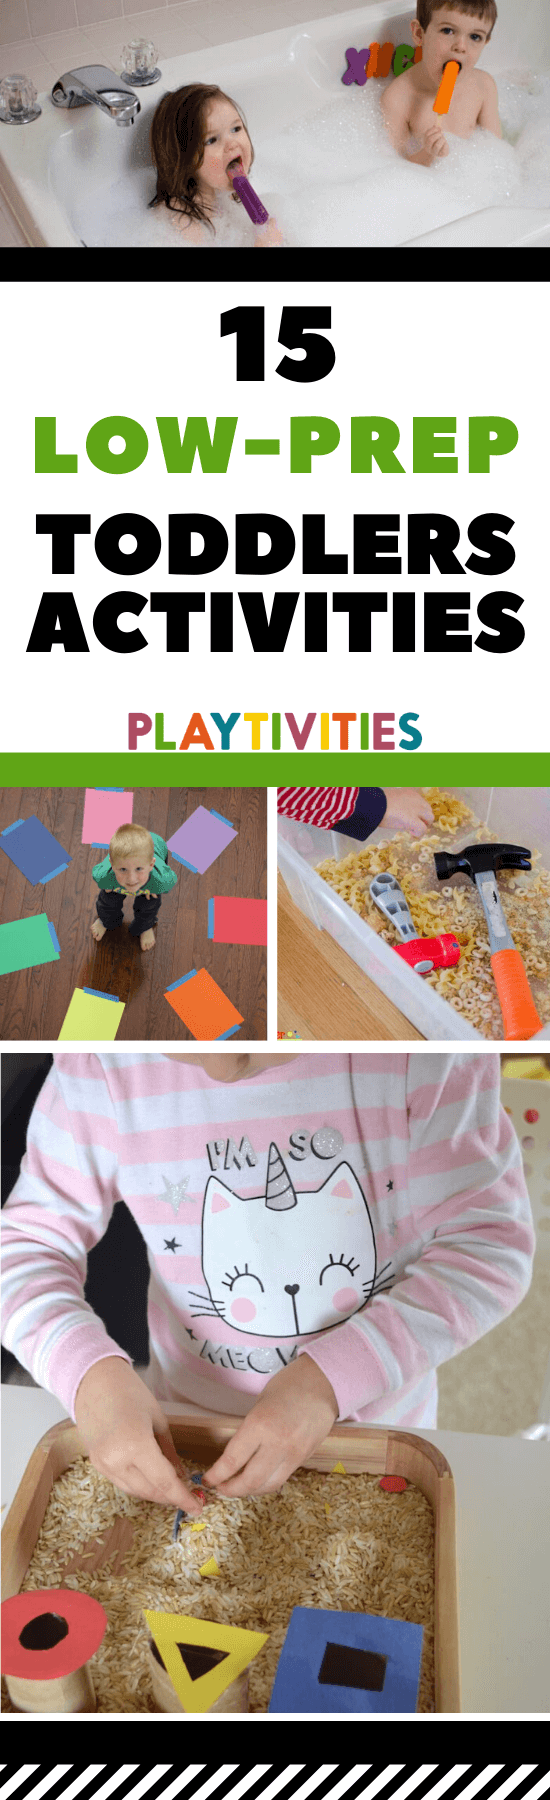 low-prep activities for toddlers